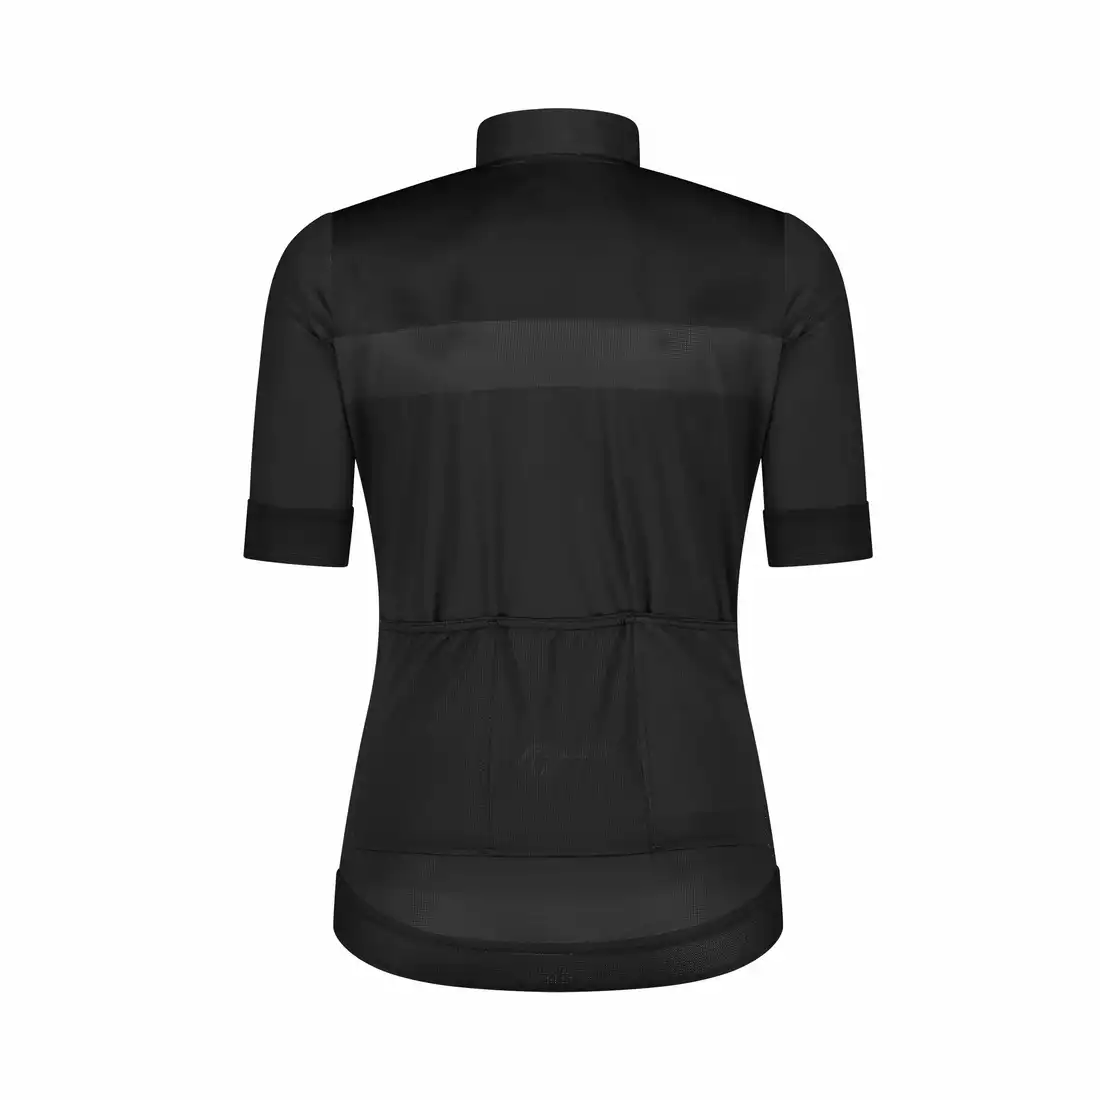 ROGELLI PRIME Cycling jersey, women, black and gray